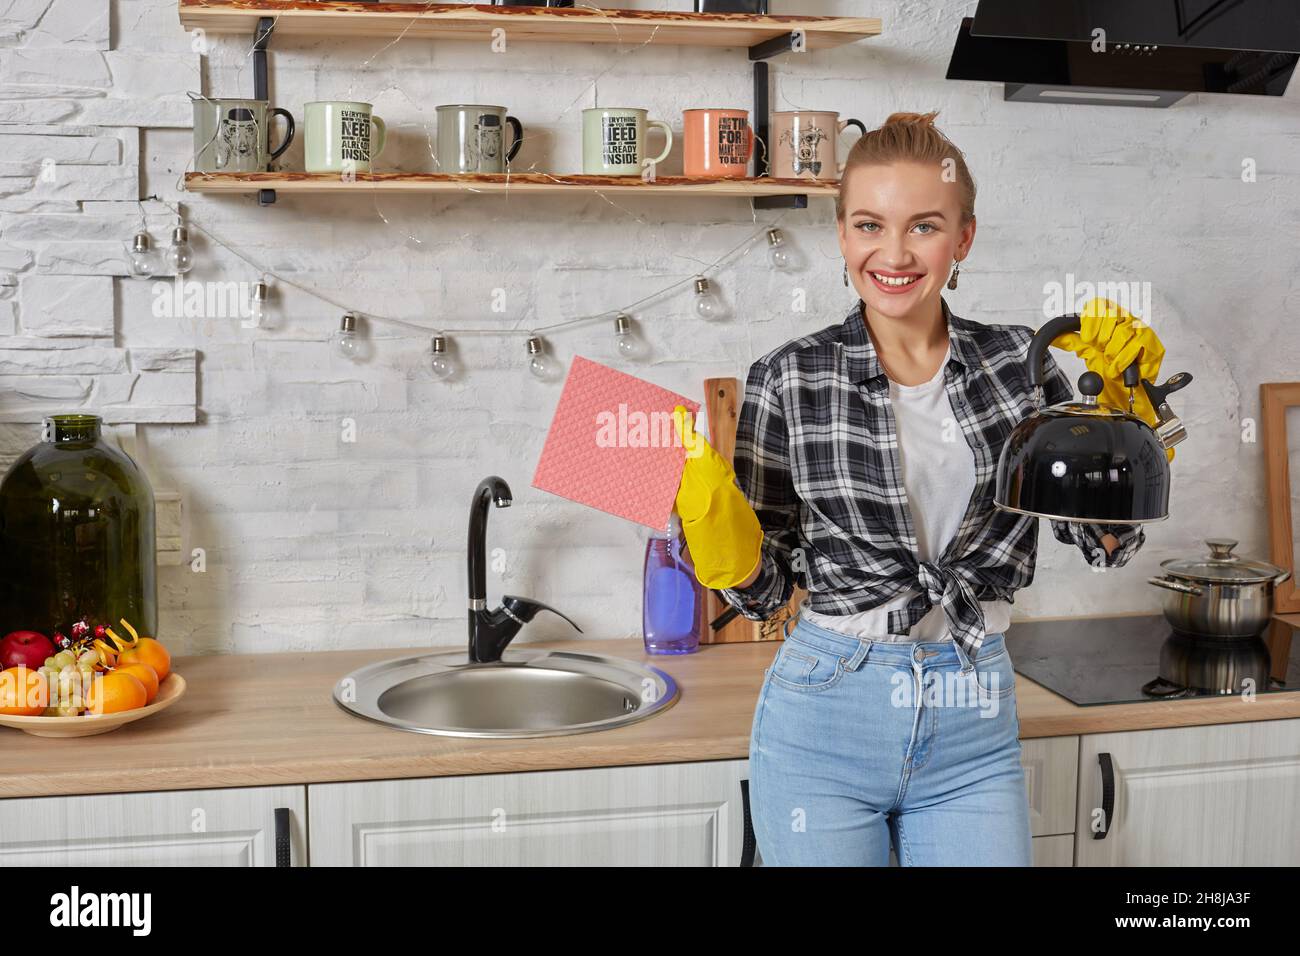 Domestic service and housekeeping concept, happy blonde lady cleaning kitchen kettle. Stock Photo